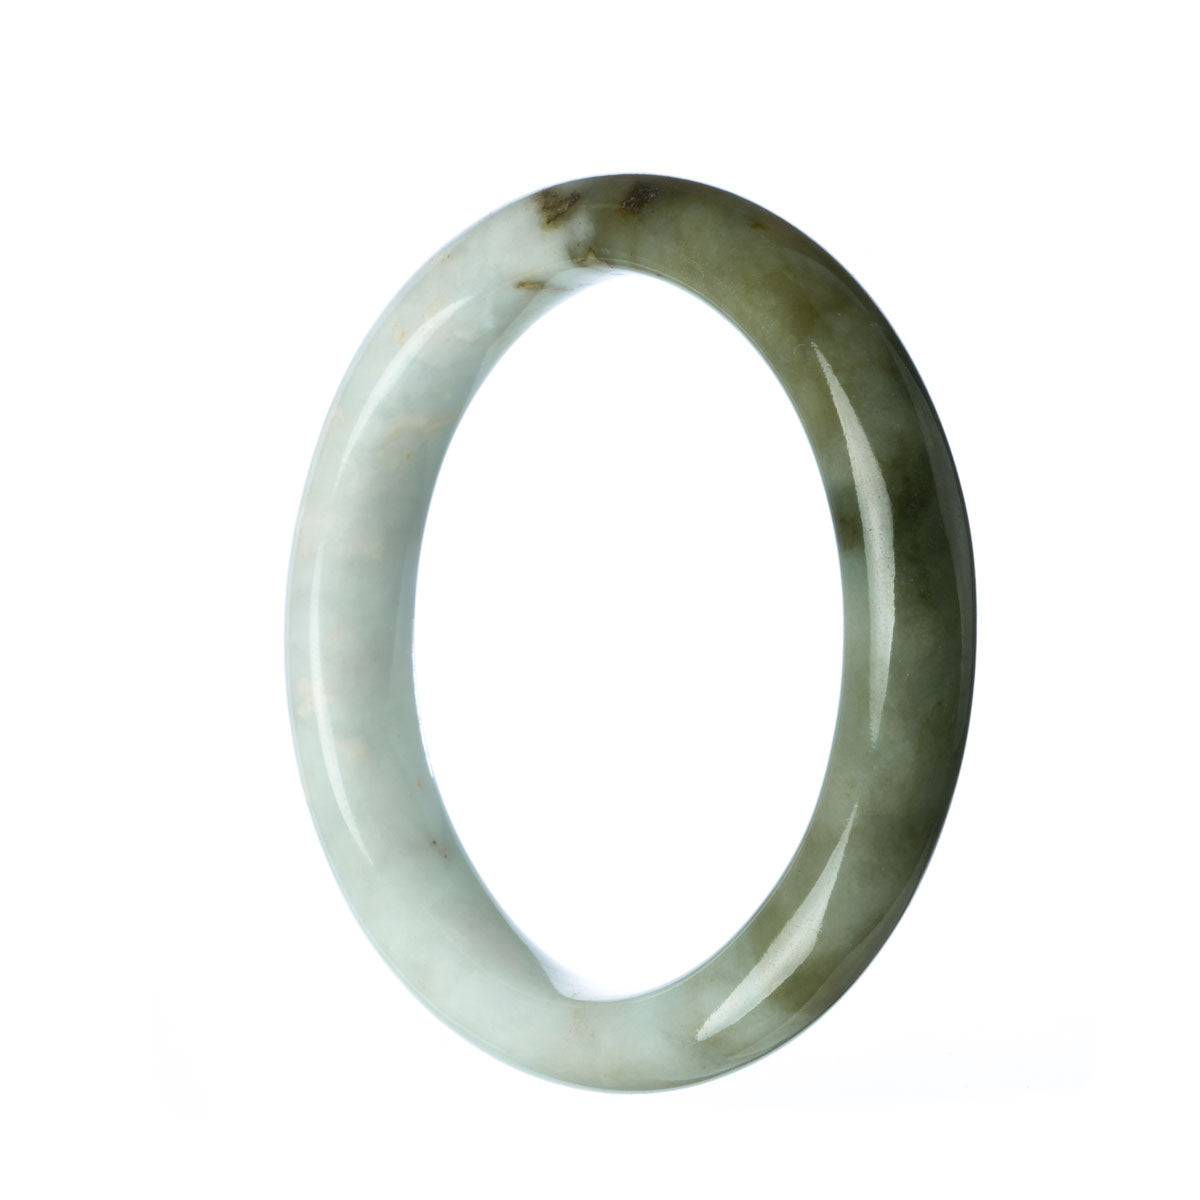 Image of an oval-shaped jade bangle with a vibrant green color, showcasing its natural beauty and smooth texture. The bangle has a semi-round shape with a diameter of 59mm, making it a perfect fit for an elegant wrist. The jade is of the highest quality, sourced from Burma, and is considered Grade A. This exquisite piece of jewelry, offered by MAYS, is a testament to the timeless allure and unique craftsmanship of Burmese jade.